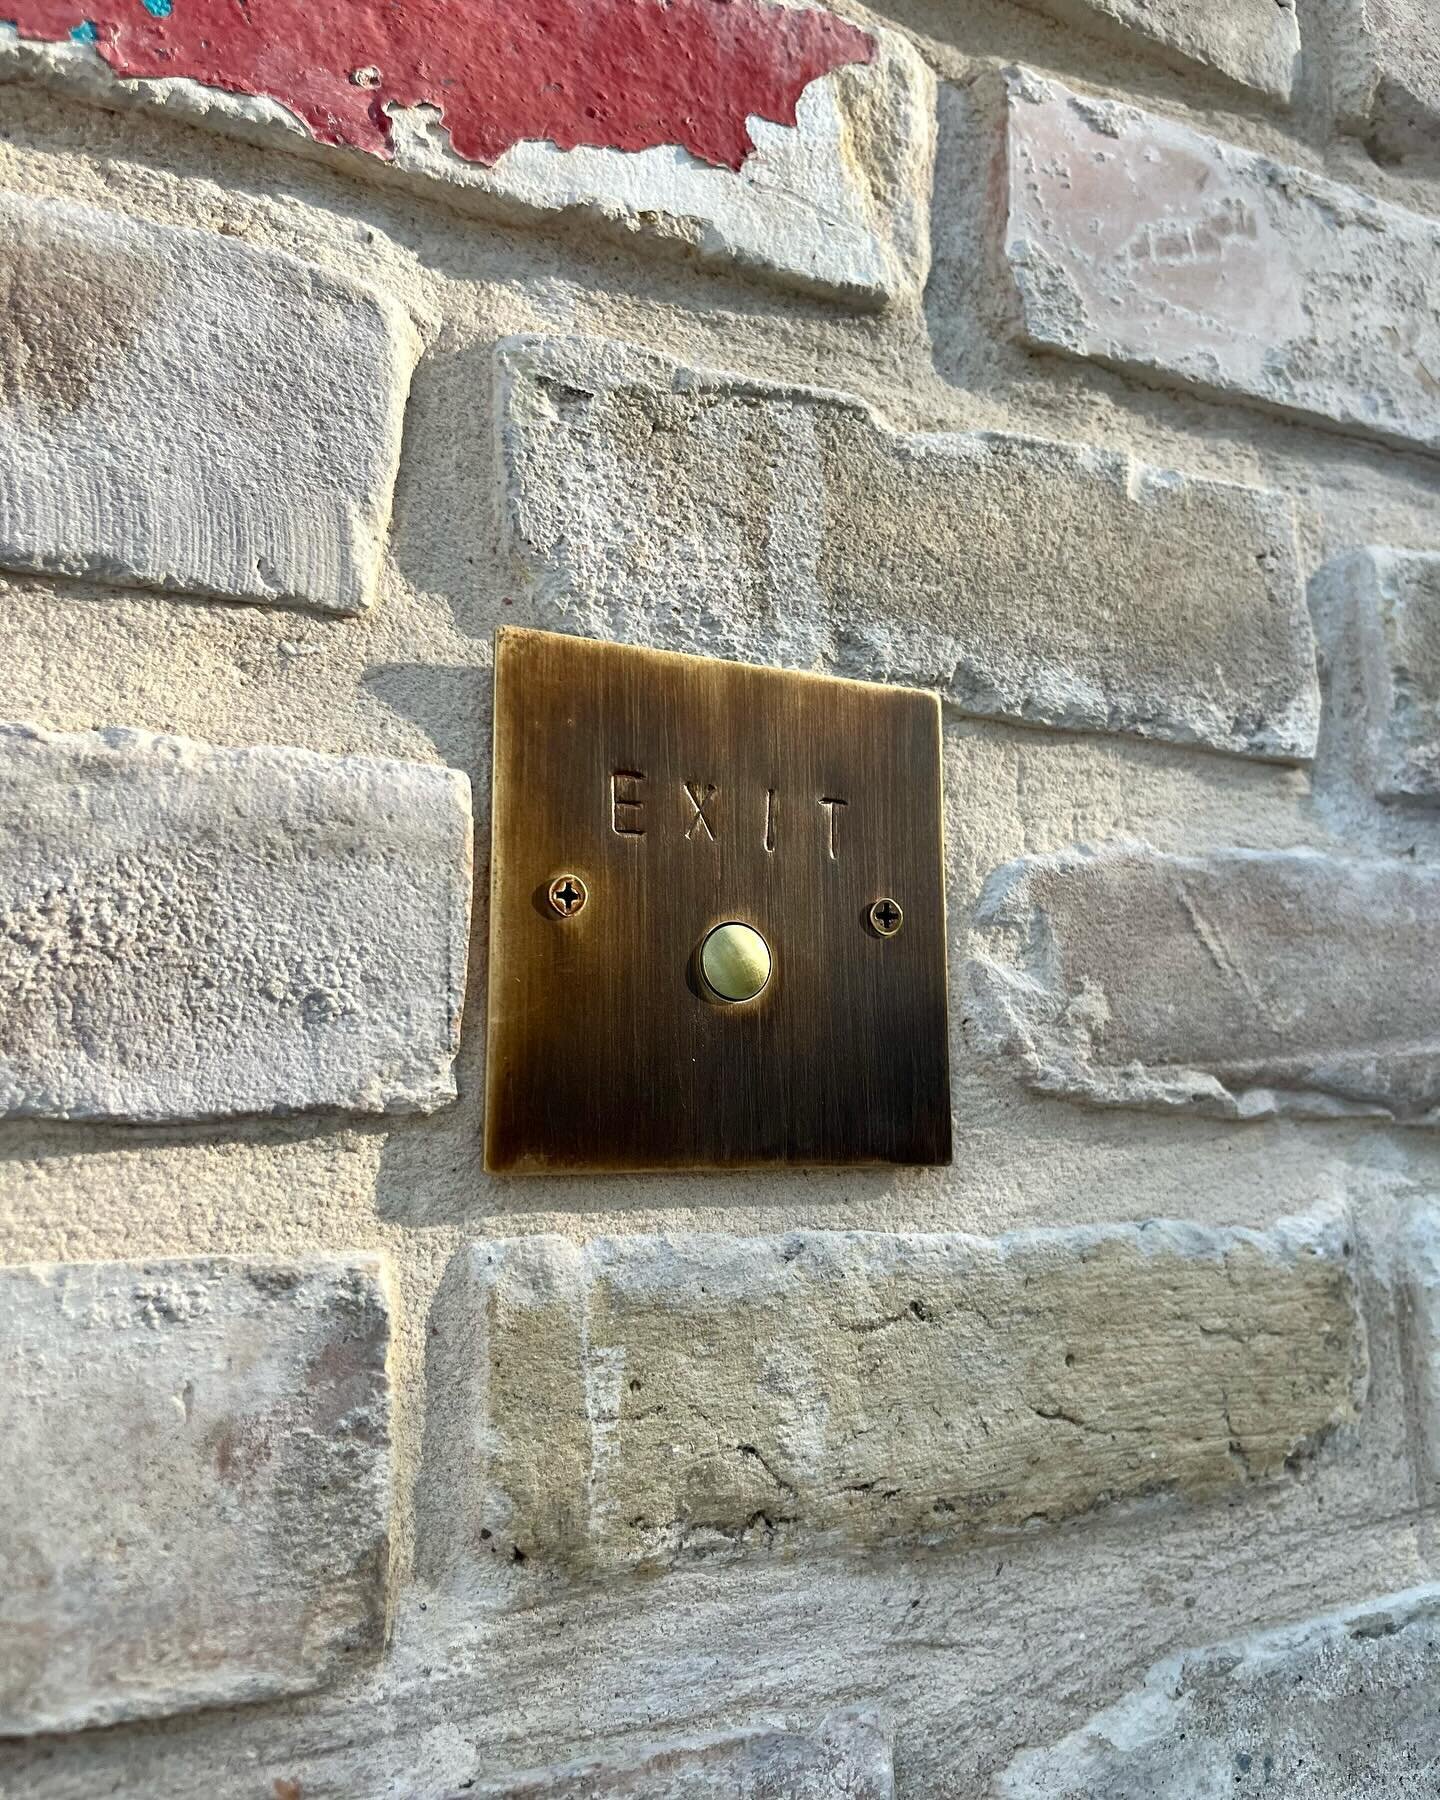 Handmade plate for front gate release. We cut, shaped, stamped, brushed, aged and cleared the plate to match the @lutronelectronics Alisse keypads inside the home. #fabrication #details #everythingisimportant simportant #accesscontrol #smarthome #sec